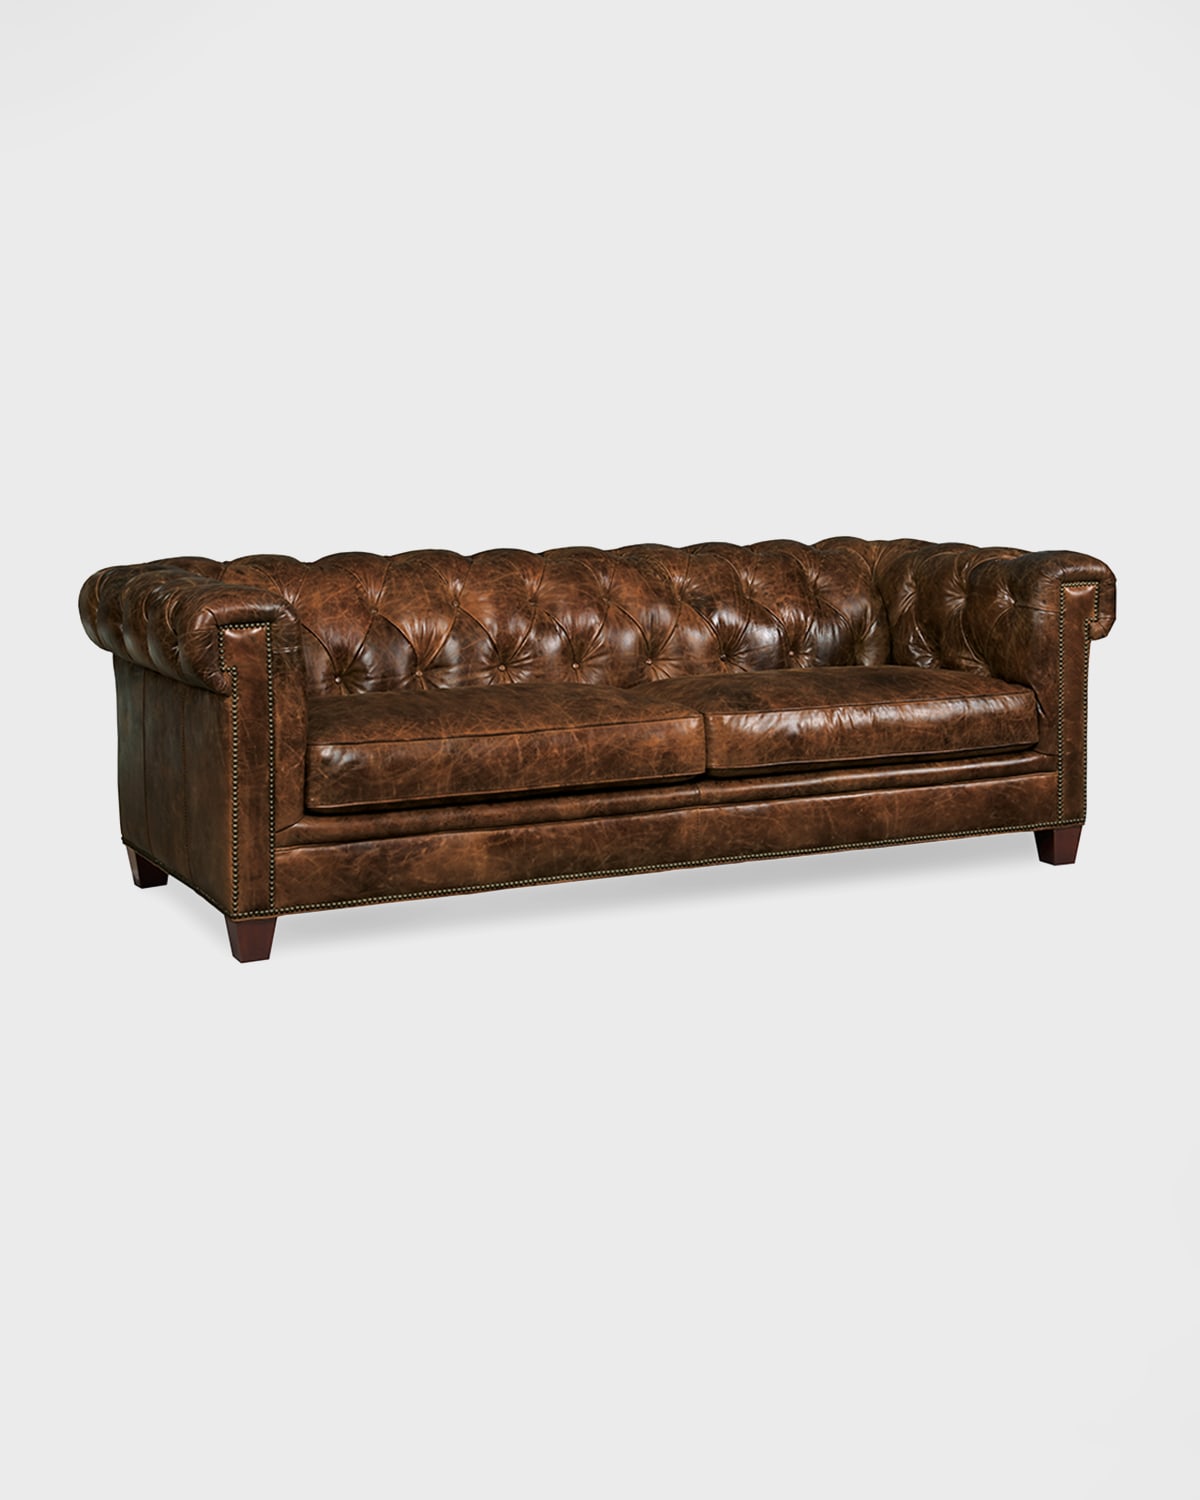 Chester Button-Tufted Leather Sofa - 95"